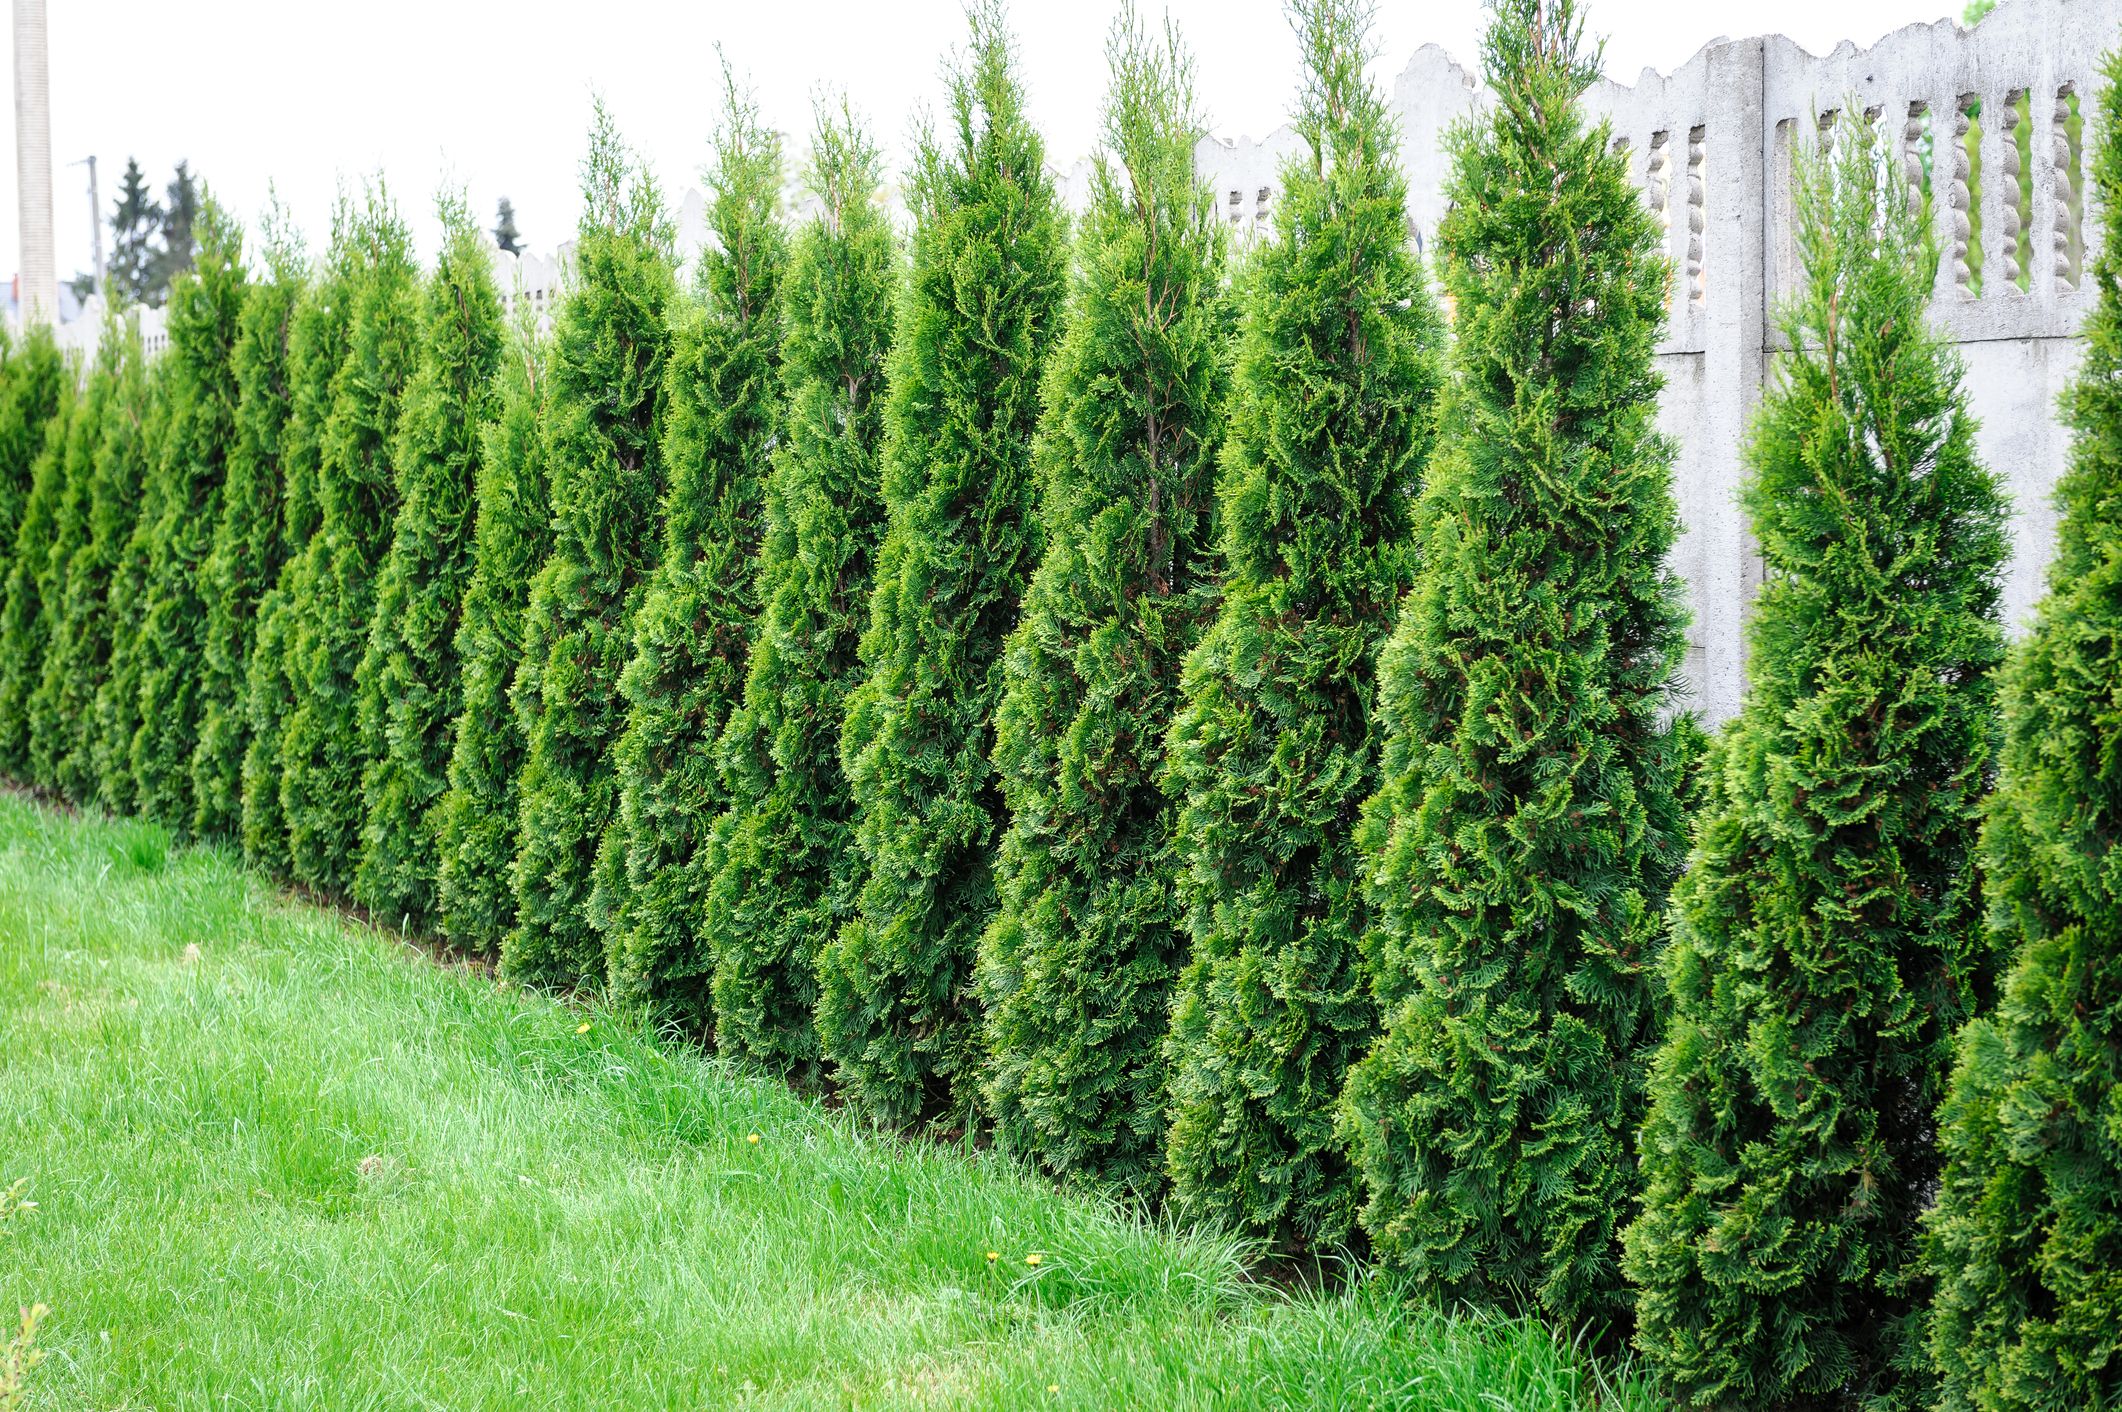 Best trees for privacy – 15 ideas to screen your yard